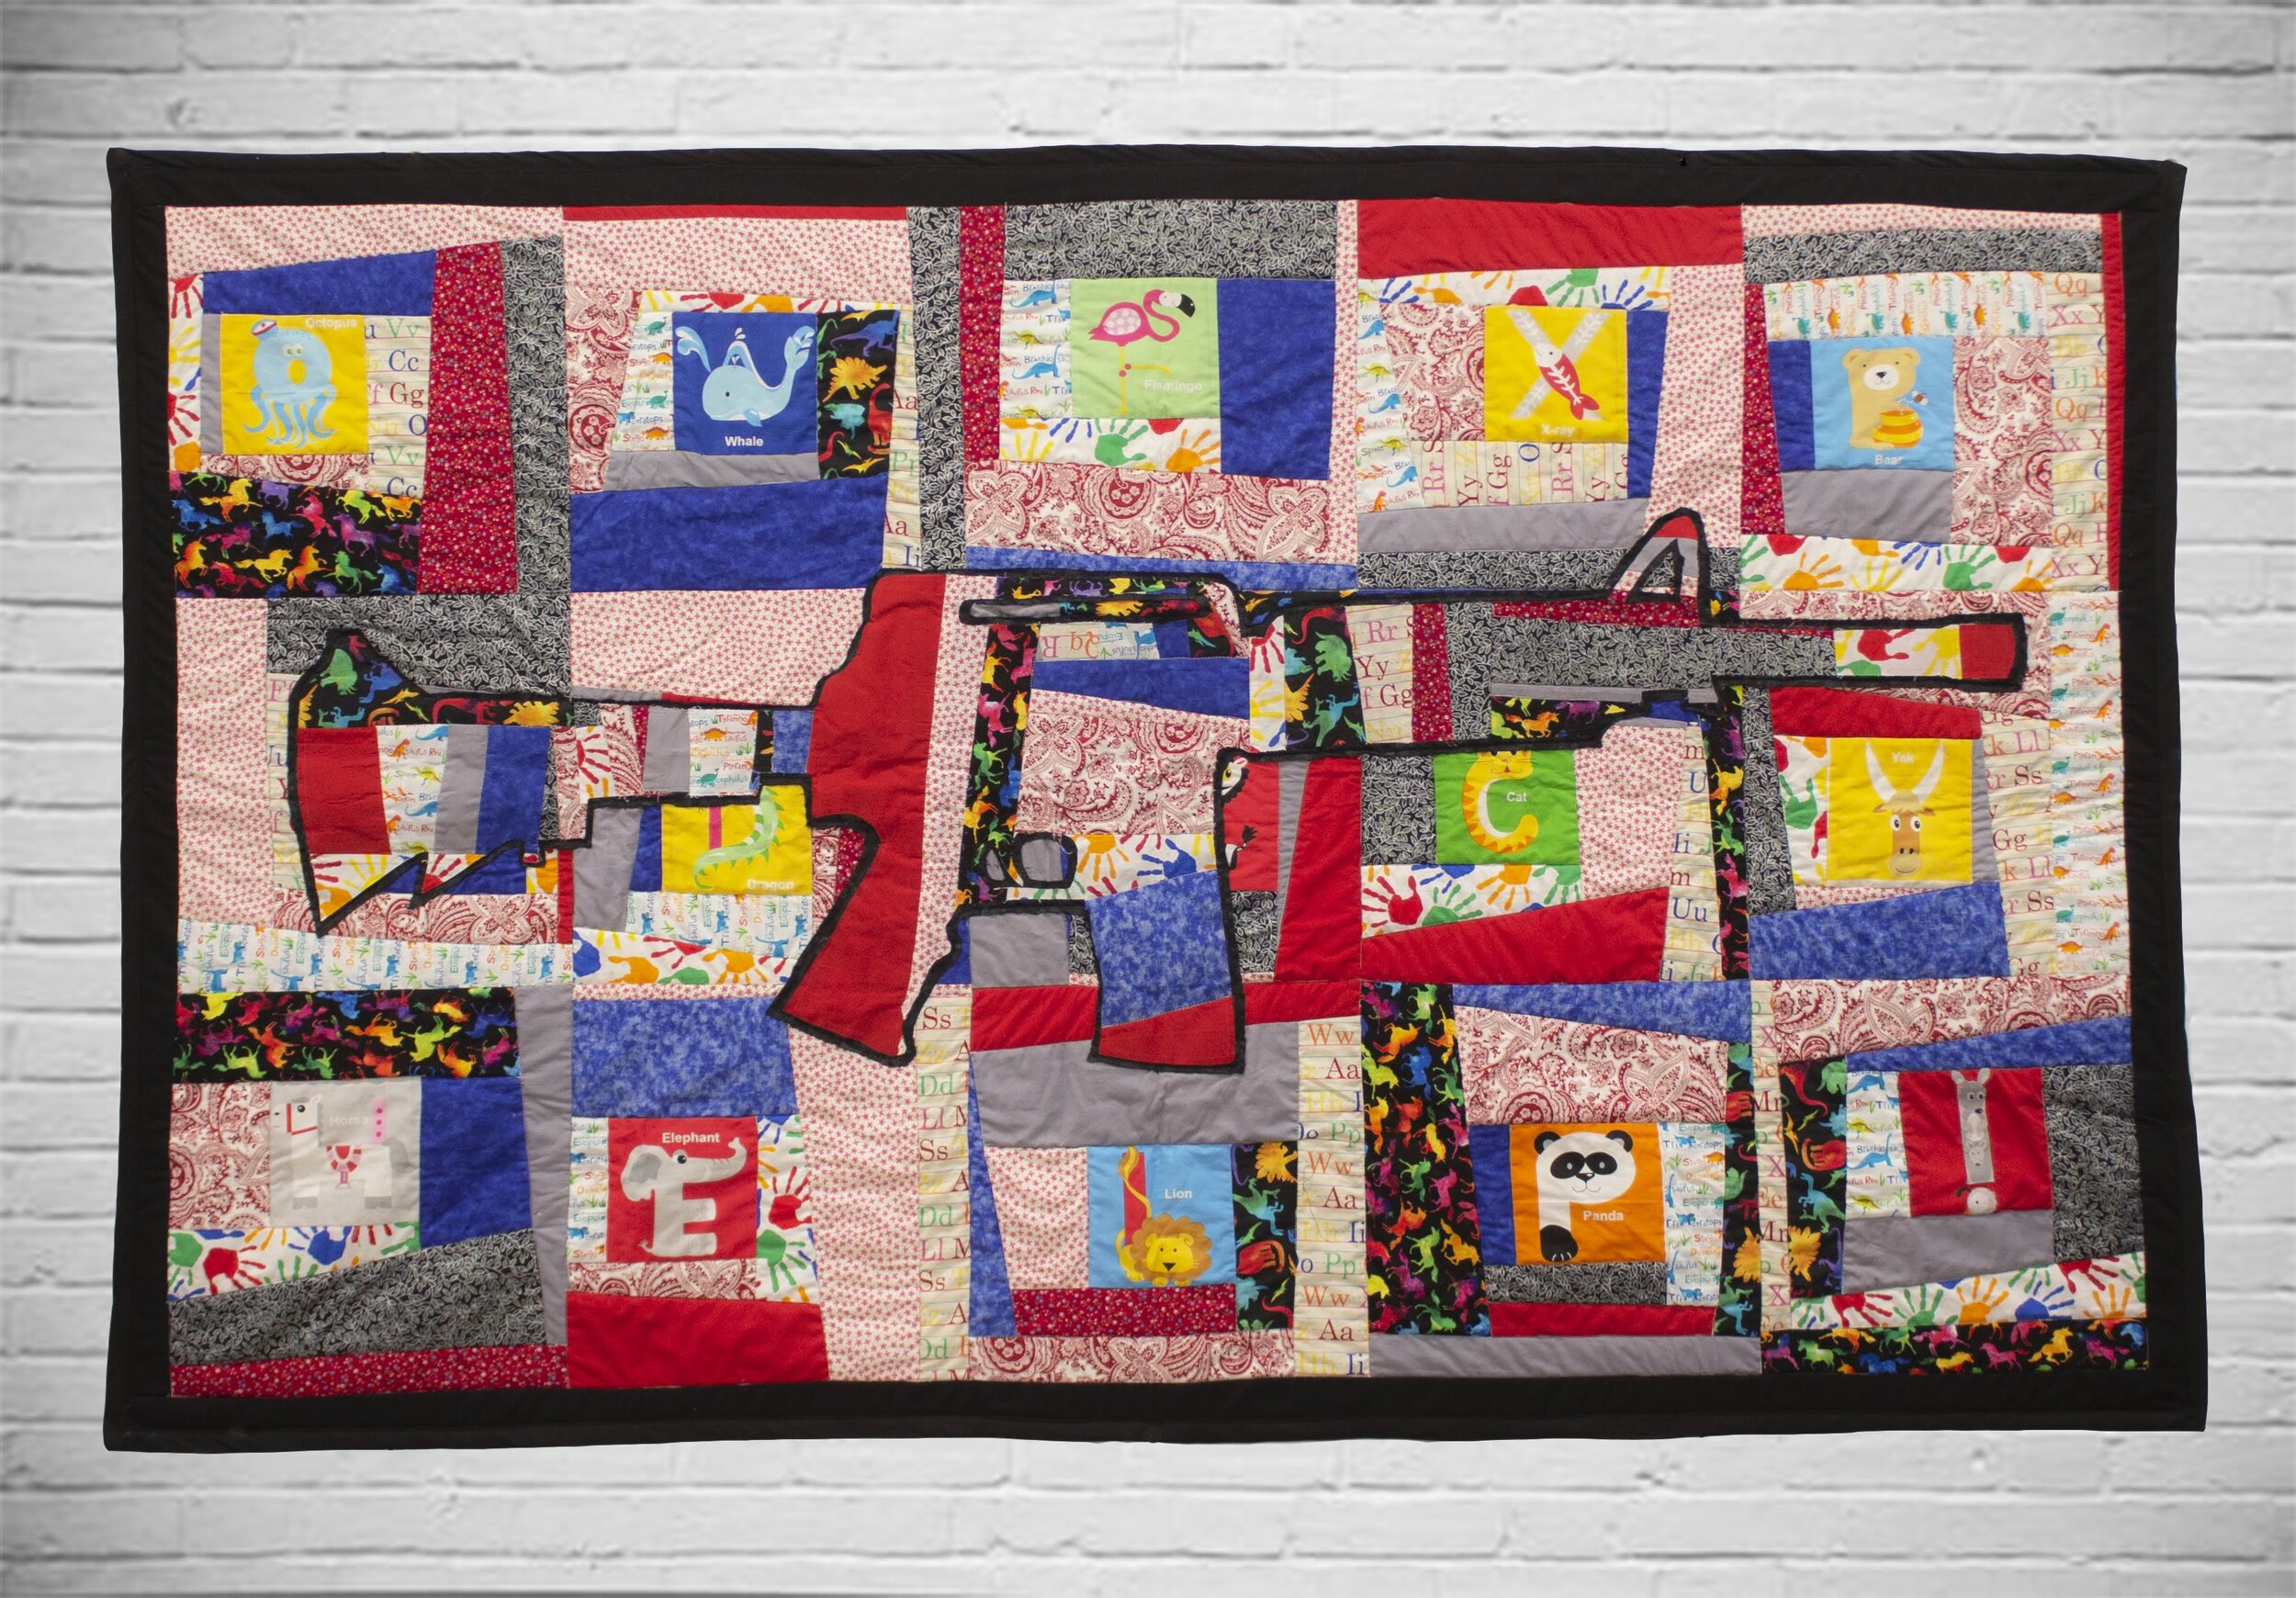  Katie Heinlein,  Duck and Cover , Quilted fabrics. University of New Haven, Senior Seminar, Spring 2019.  